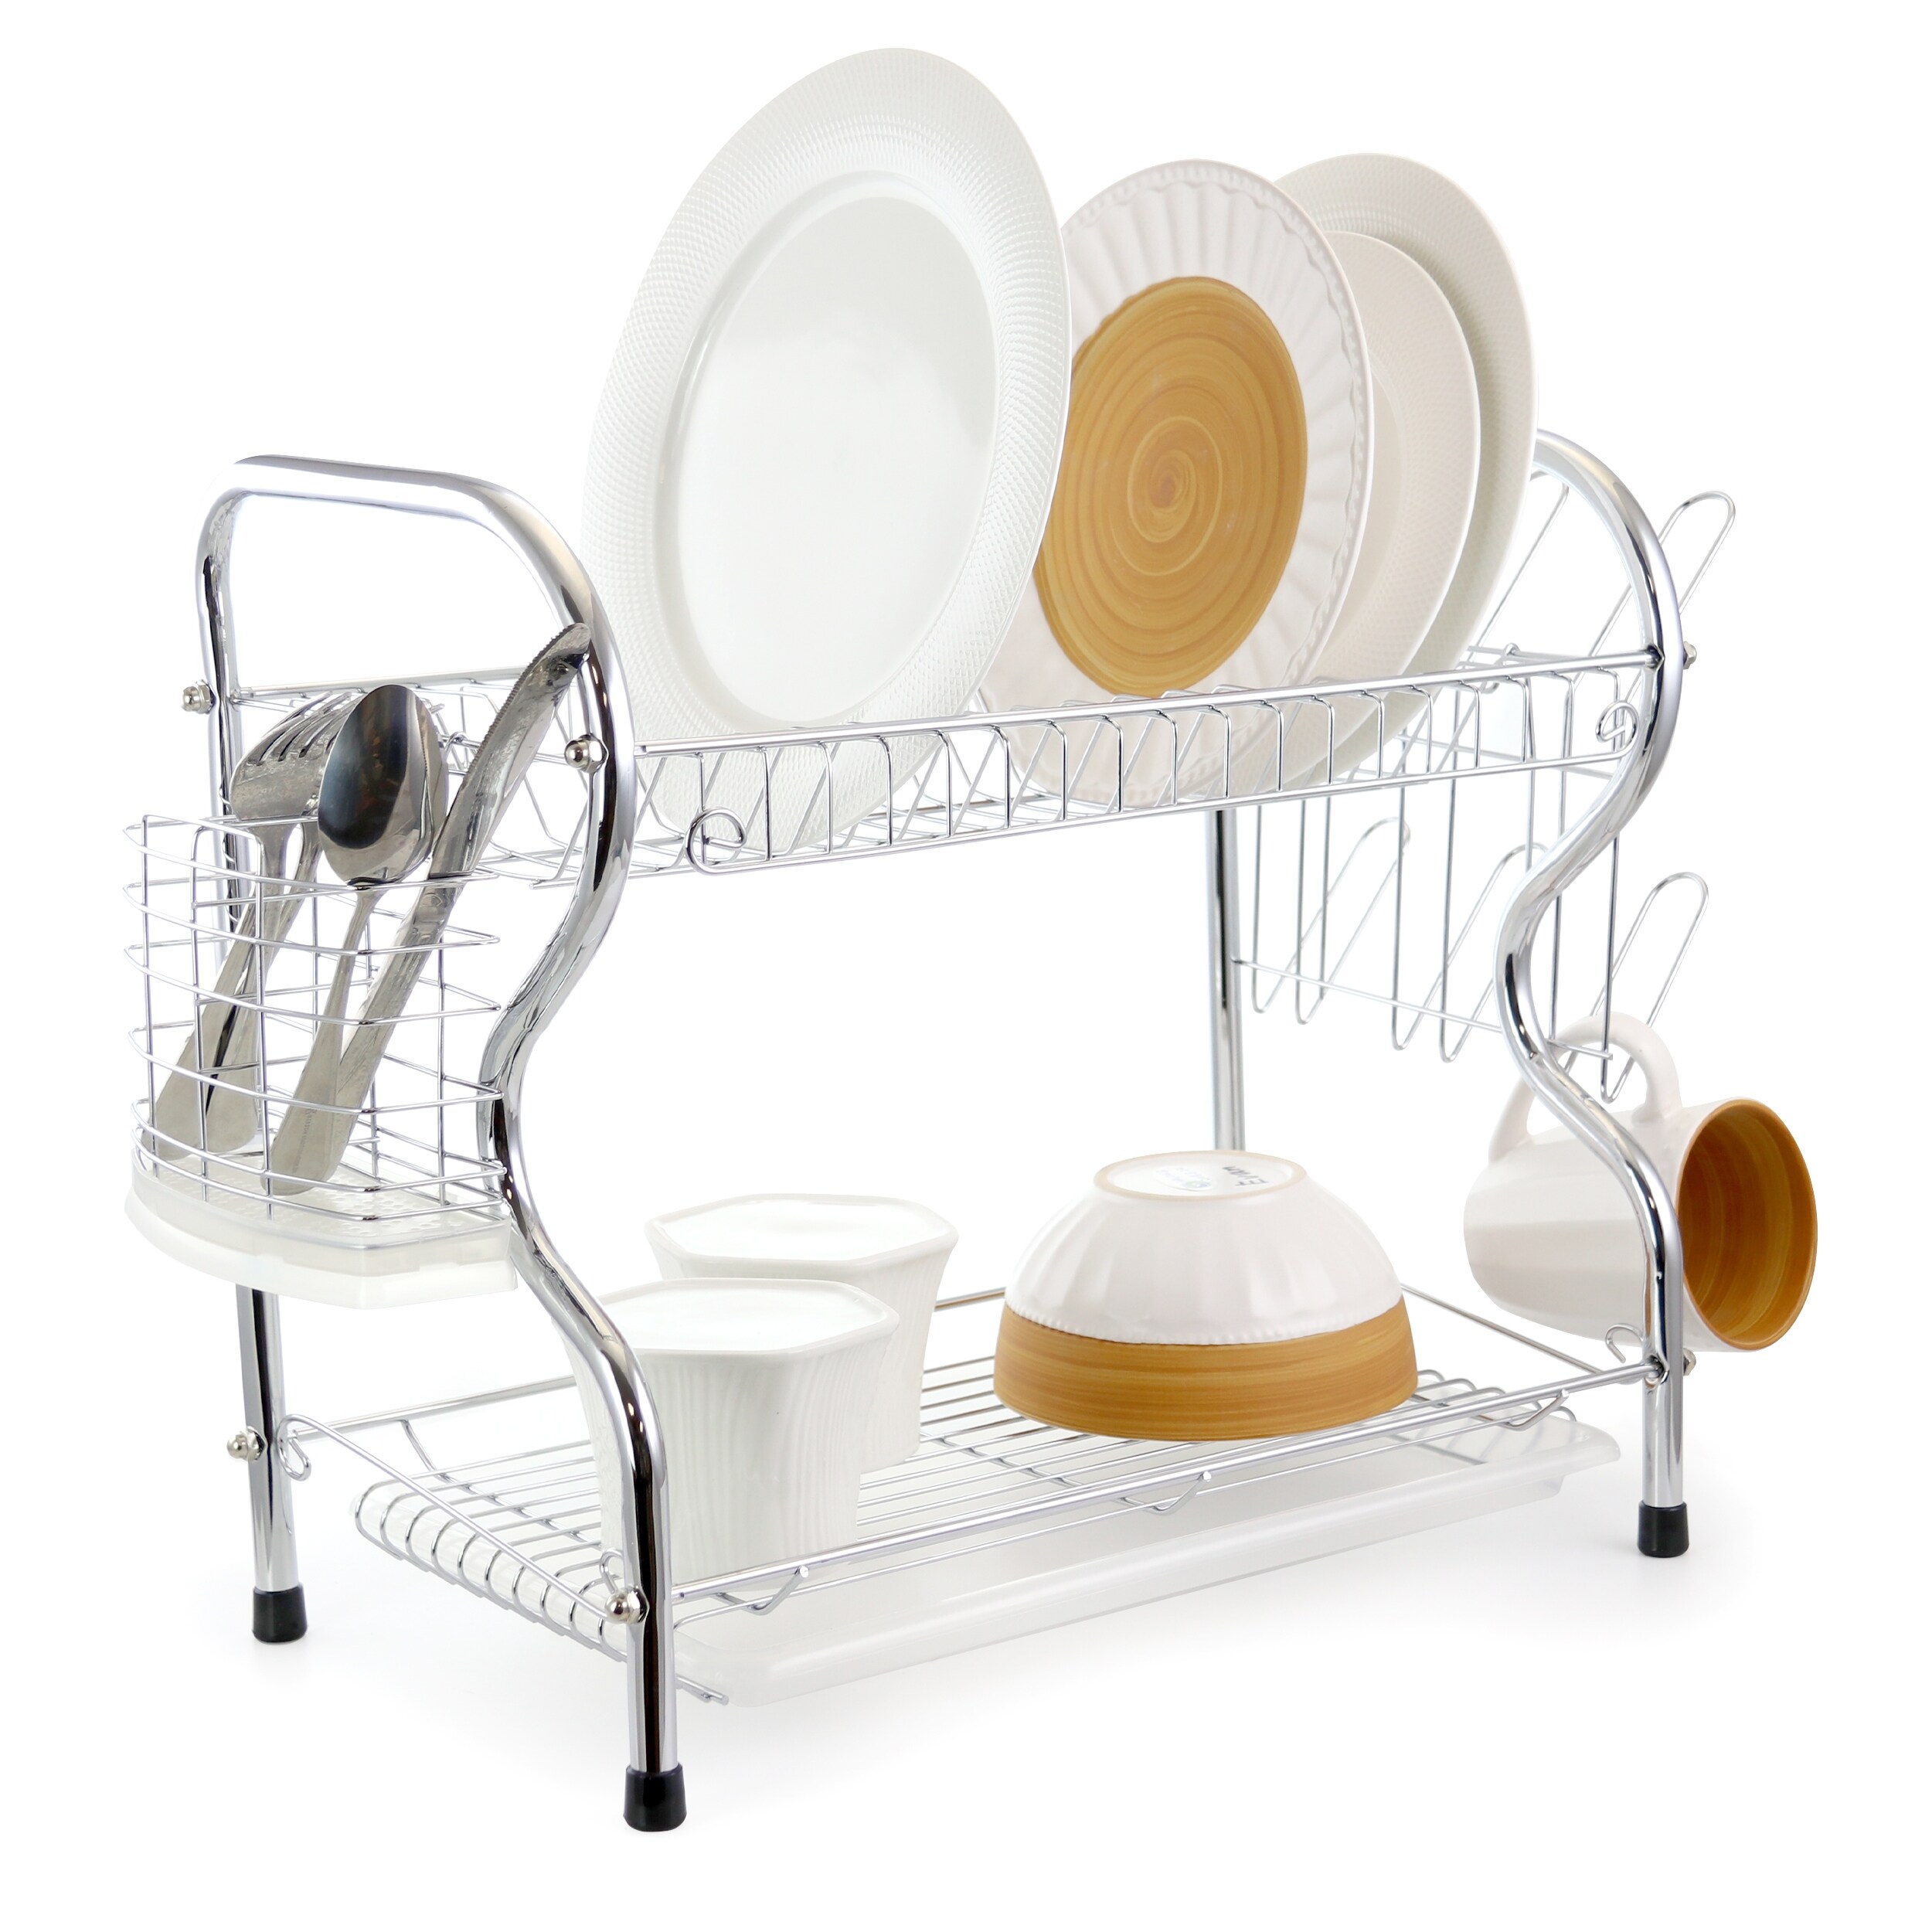 https://ak1.ostkcdn.com/images/products/is/images/direct/4b5dd4fd445e8bd4f779fad1c50265ae6f4a3b5b/Better-Chef-16-inch-2-Level-Dish-Rack.jpg